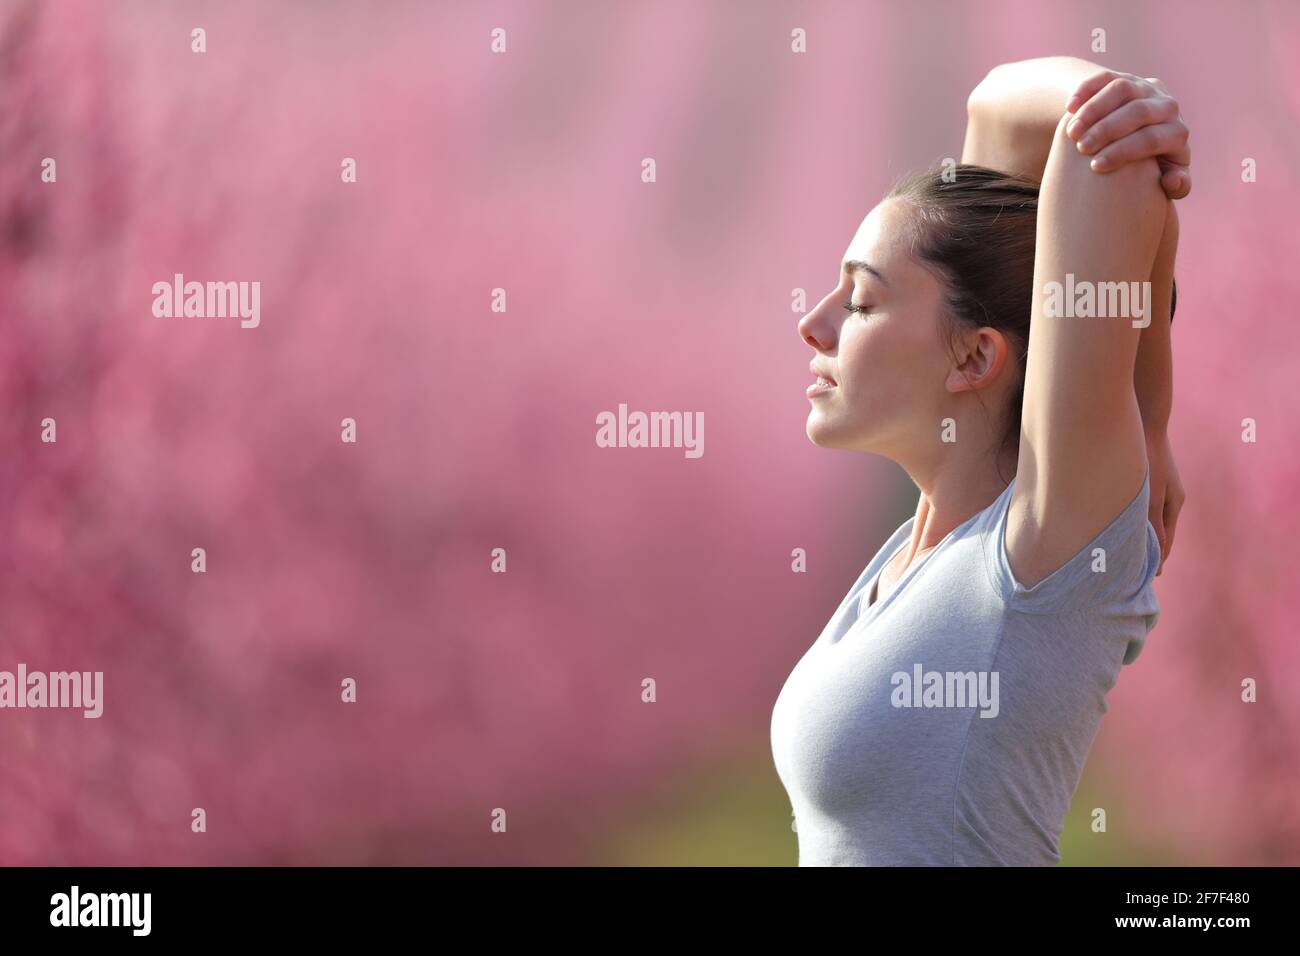 Side view portrait of a relaxed runner stretching arms in a field after run Stock Photo